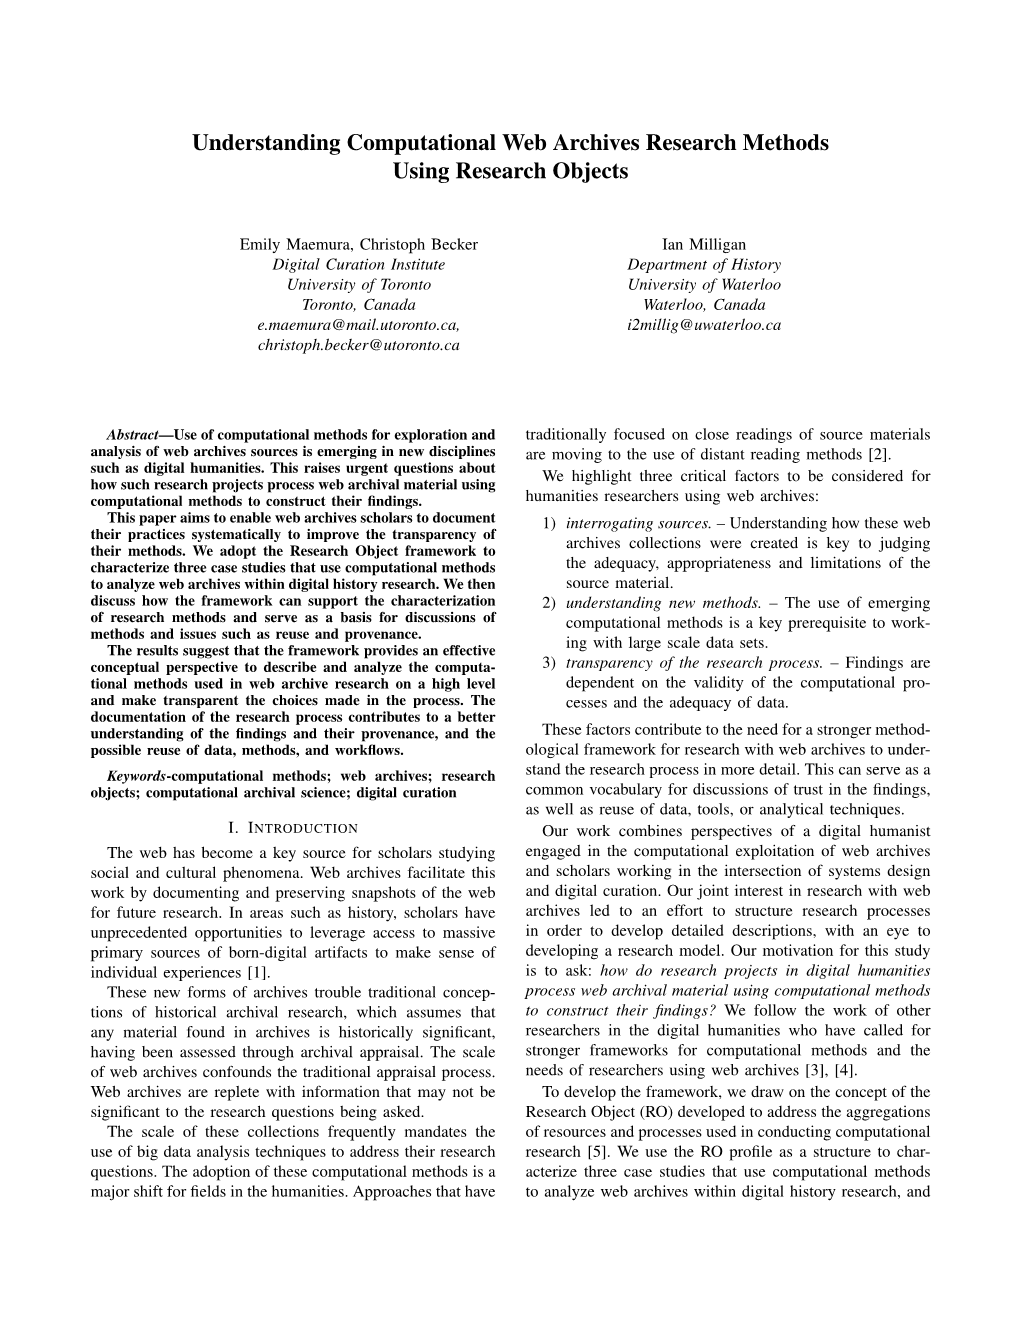 Understanding Computational Web Archives Research Methods Using Research Objects